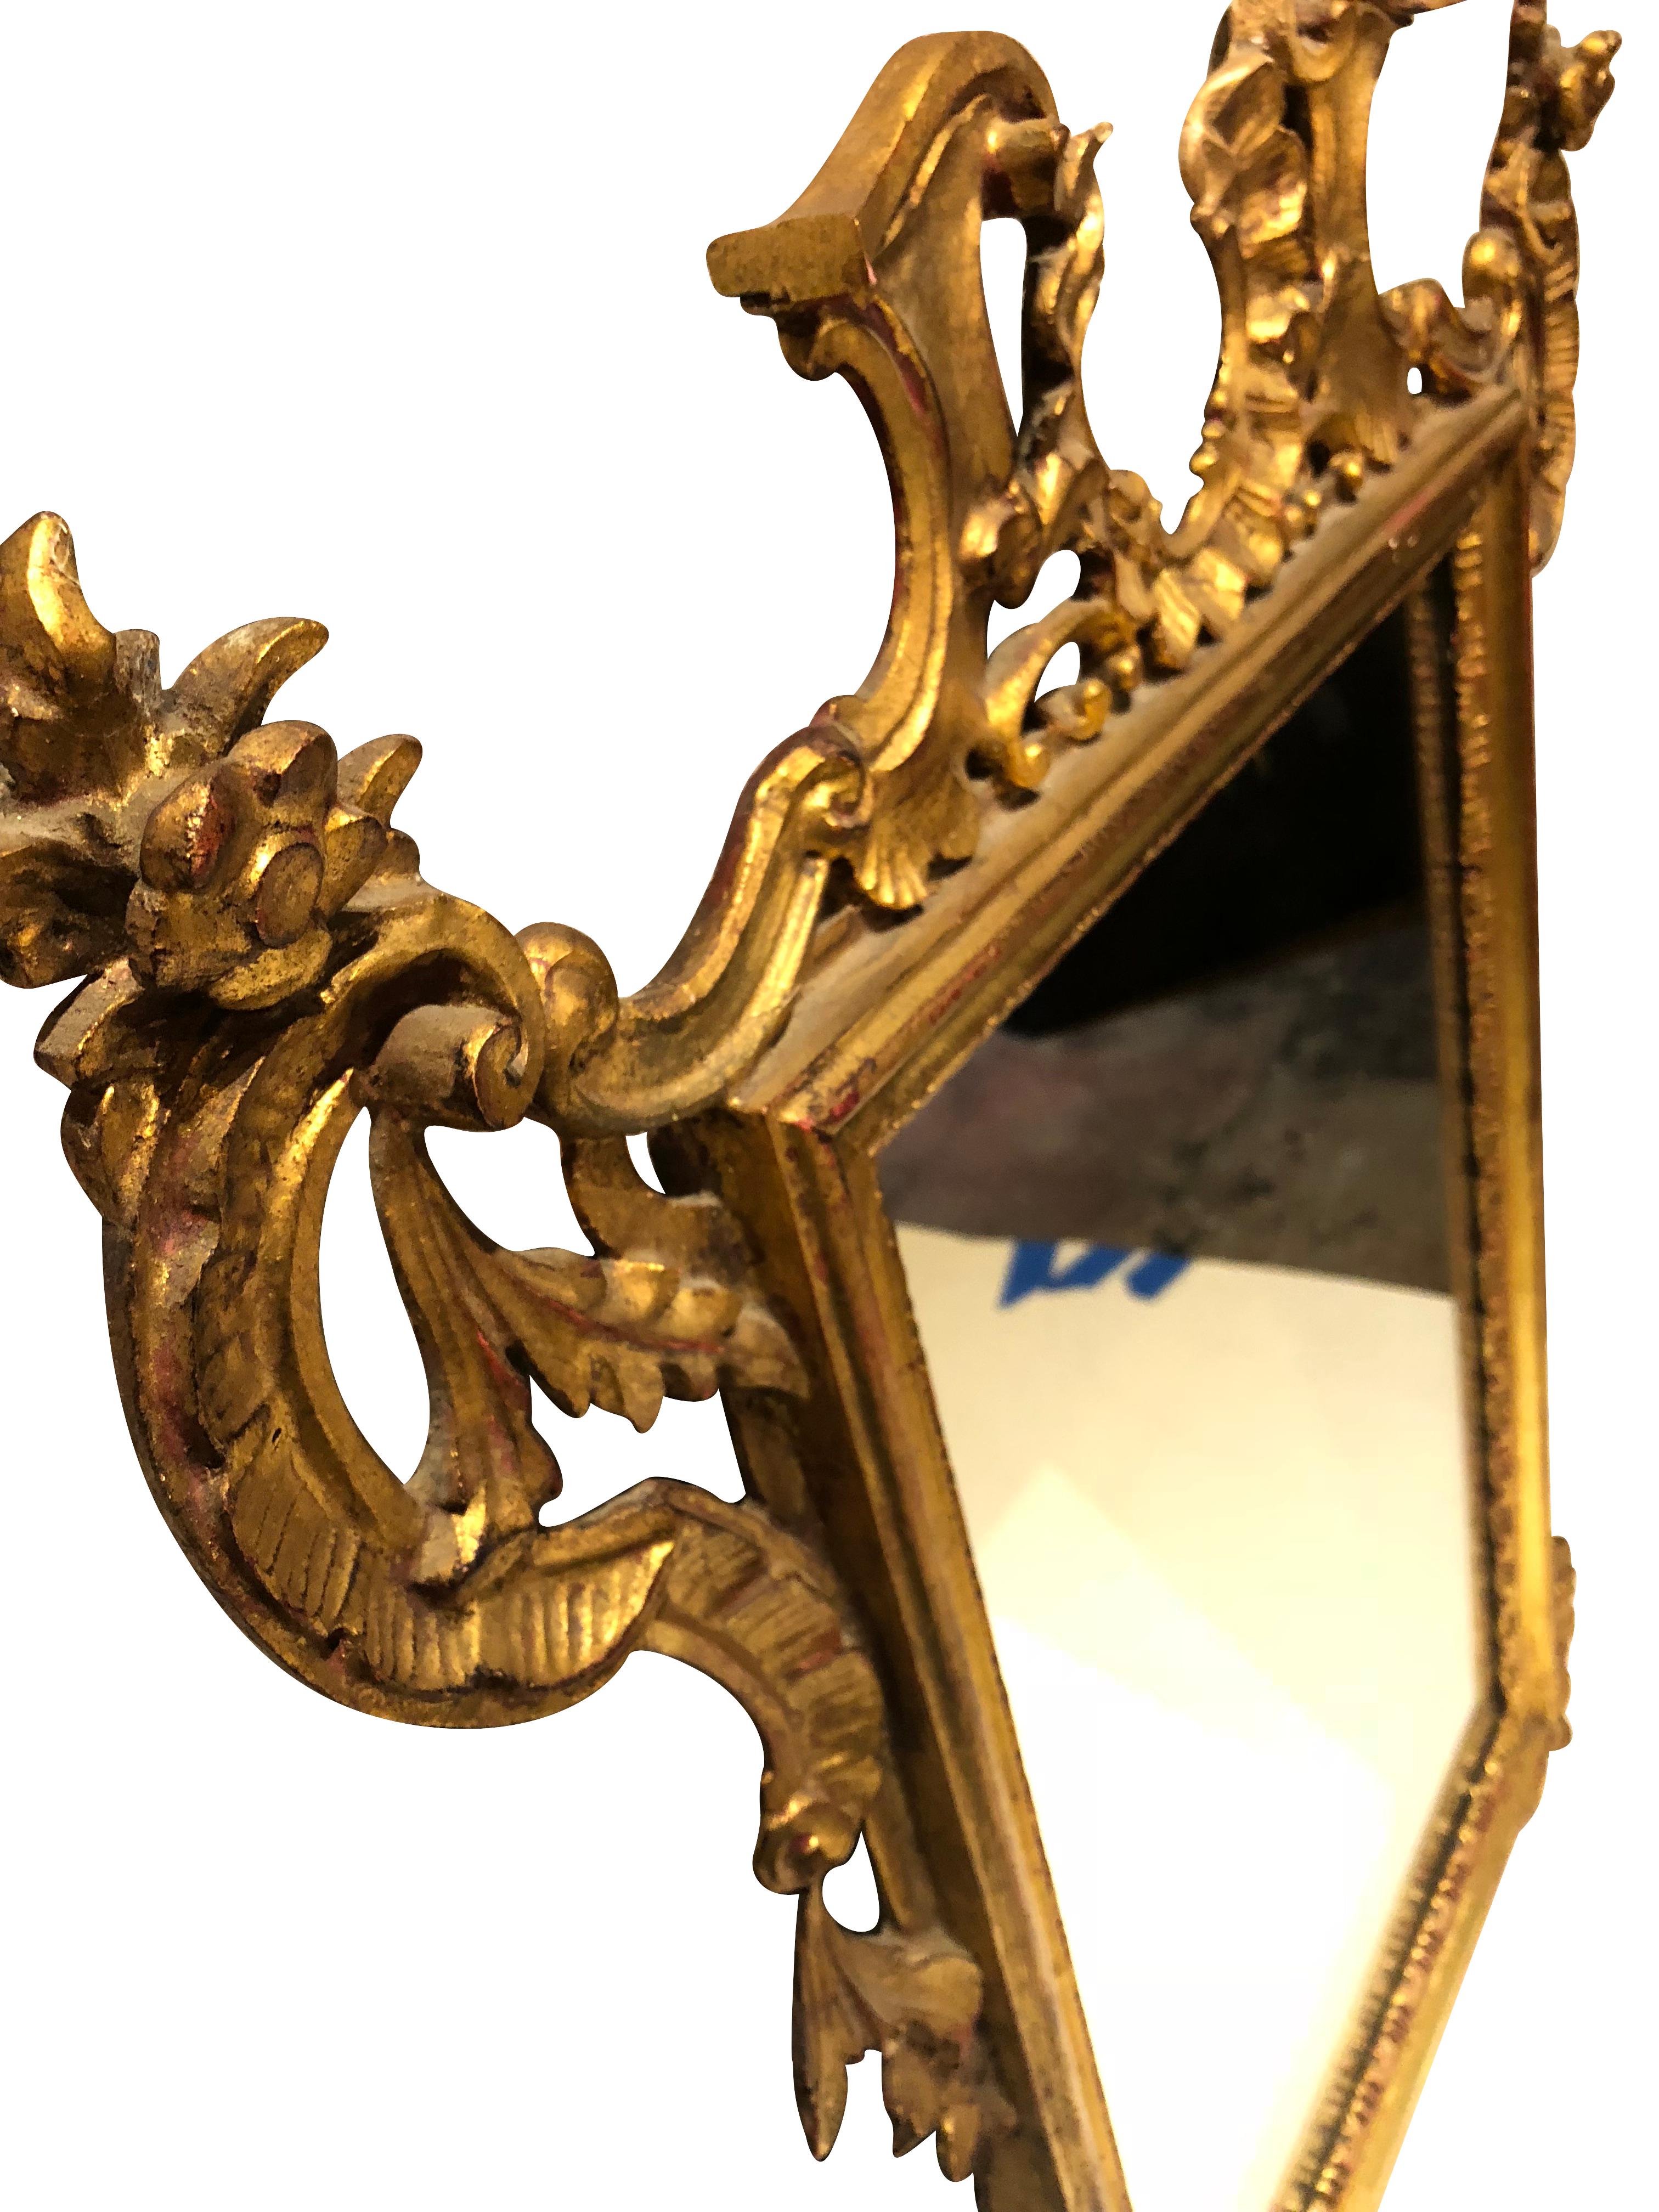 French antique Rococo style giltwood carved mirror
France, circa 1890
Framed: Height 32, width 24